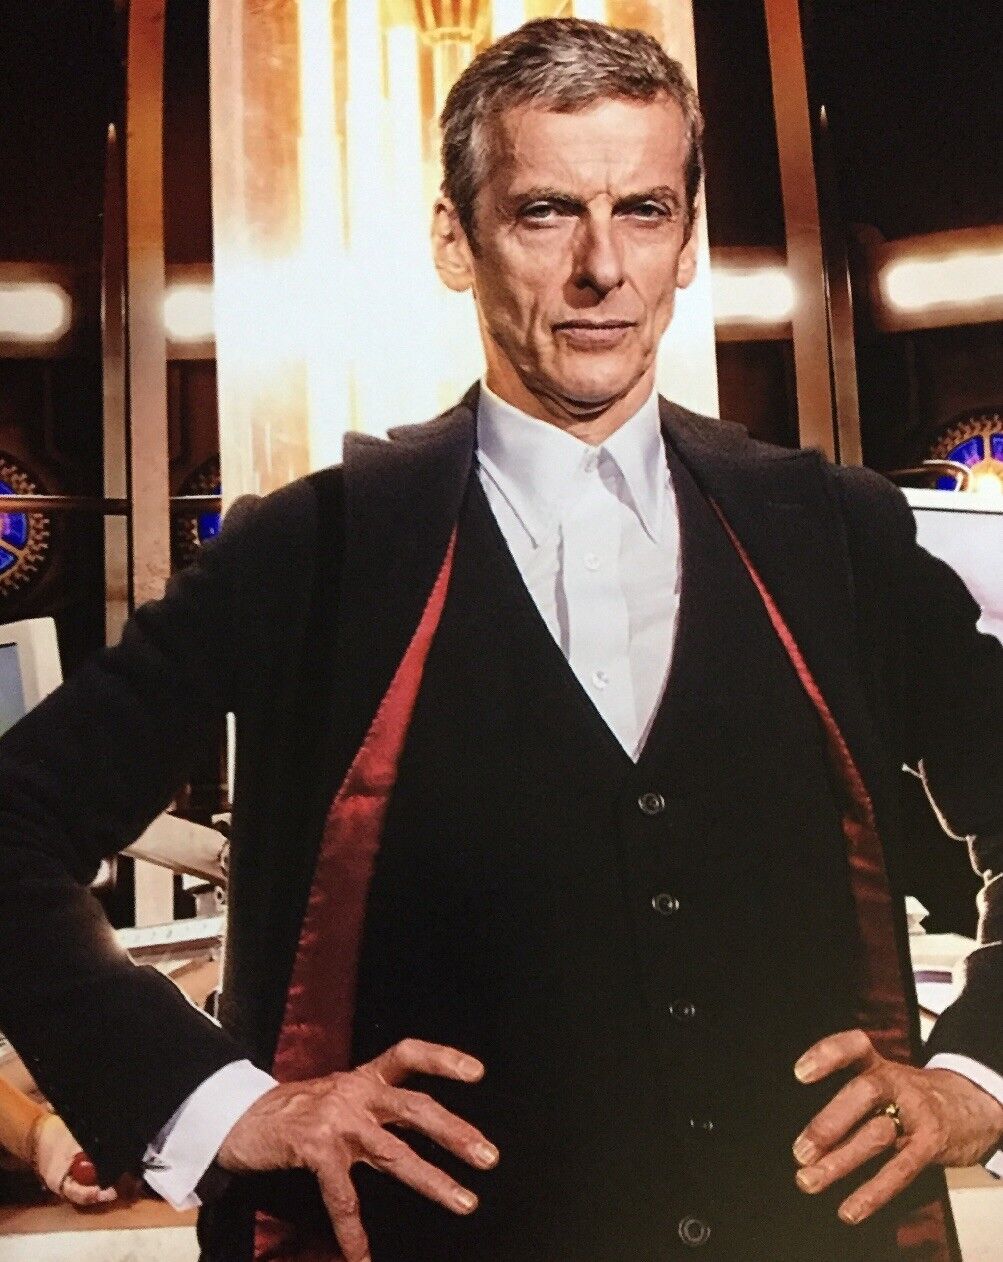 Peter Capaldi 8x10 Celebrity Photo Poster painting Print Doctor Who TV SHOW